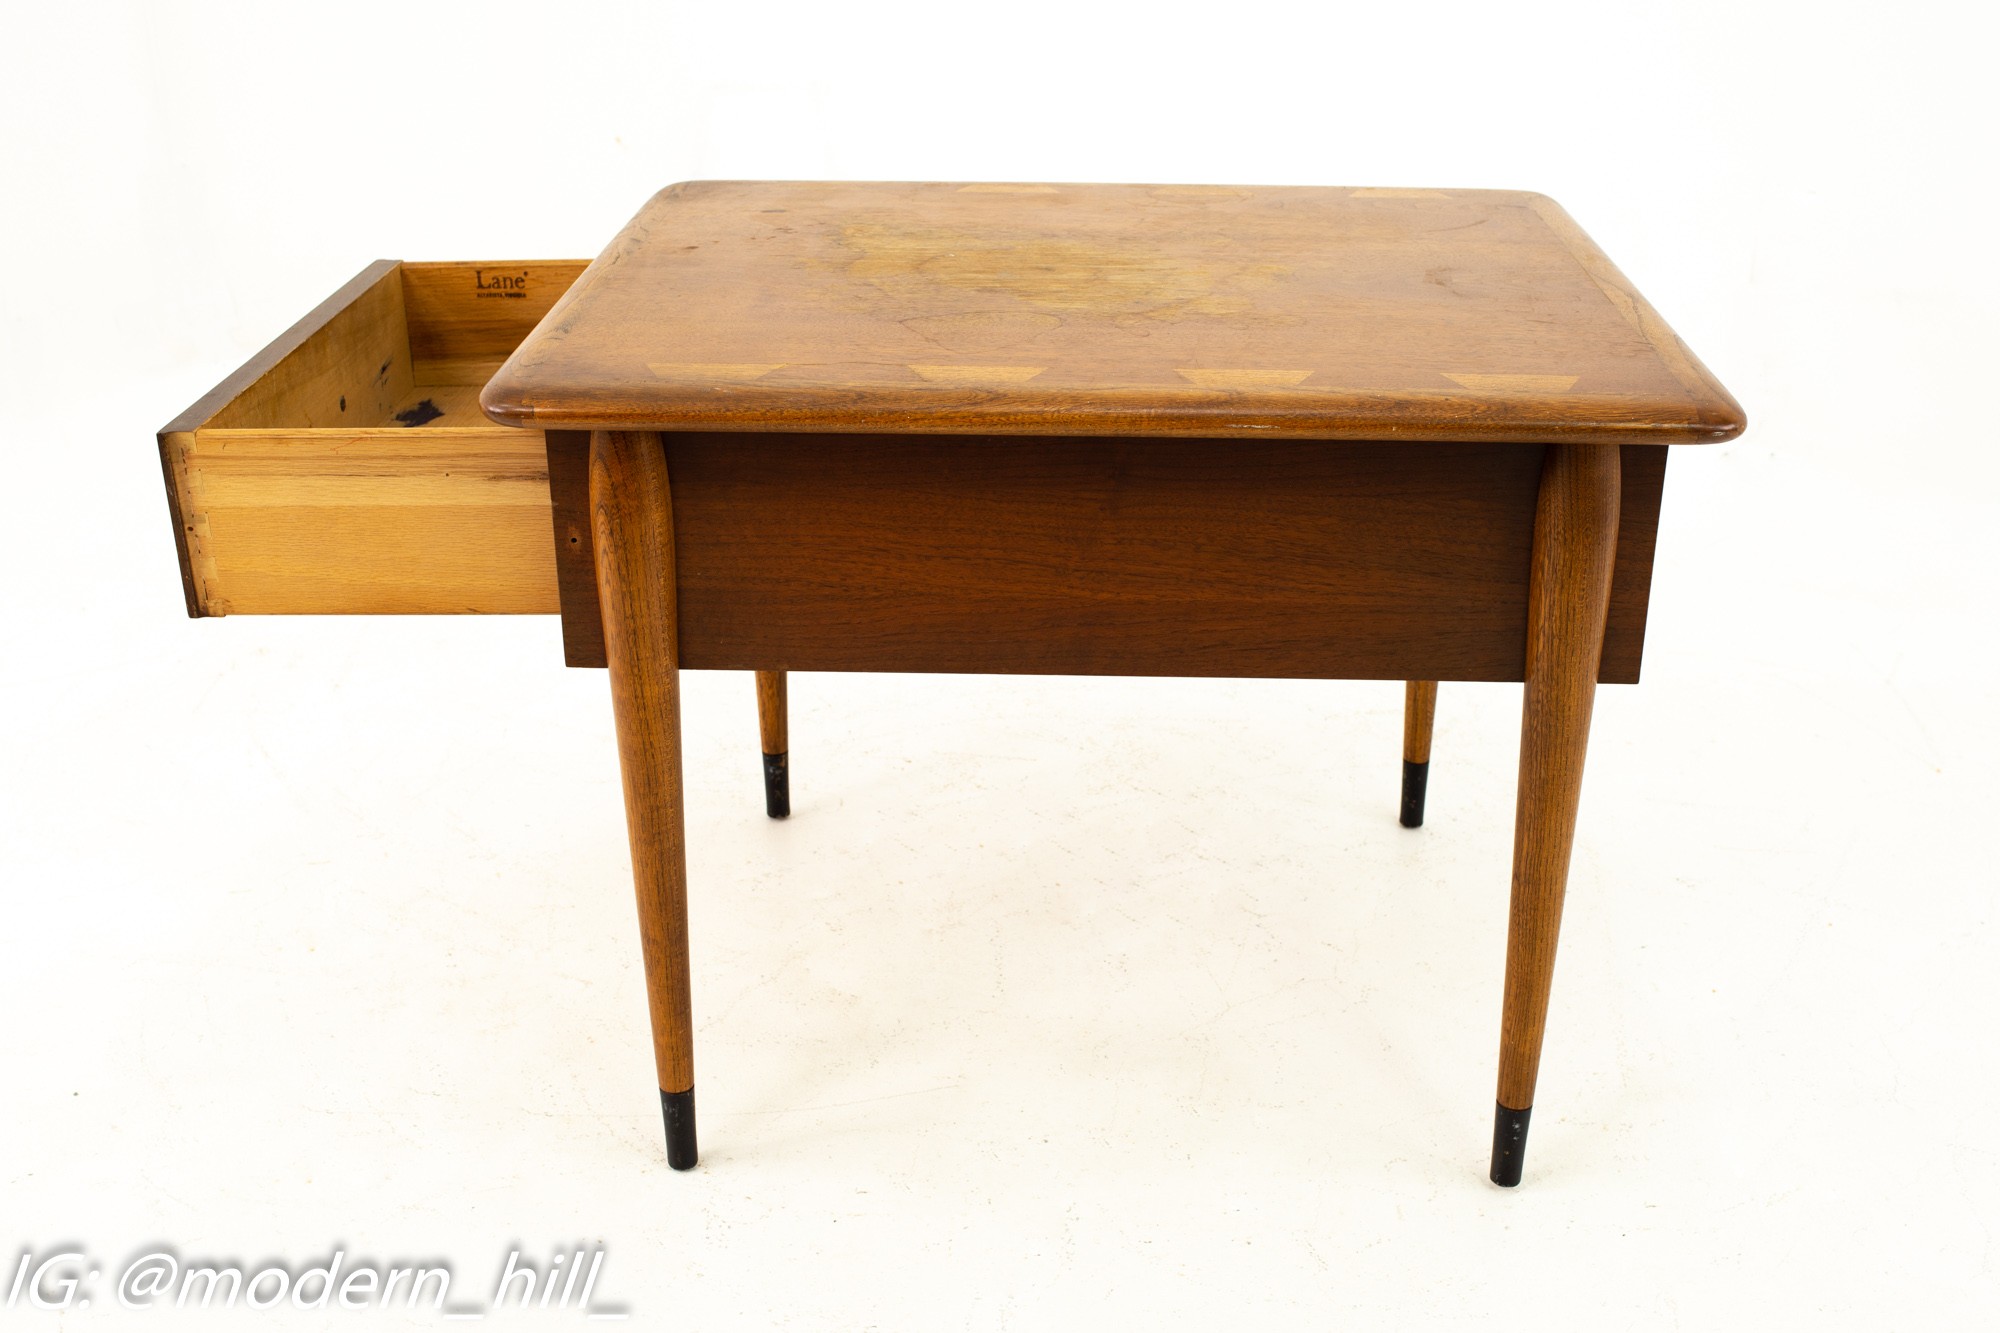 Andre Bus Lane Acclaim Mid Century Walnut Dovetail Side Table